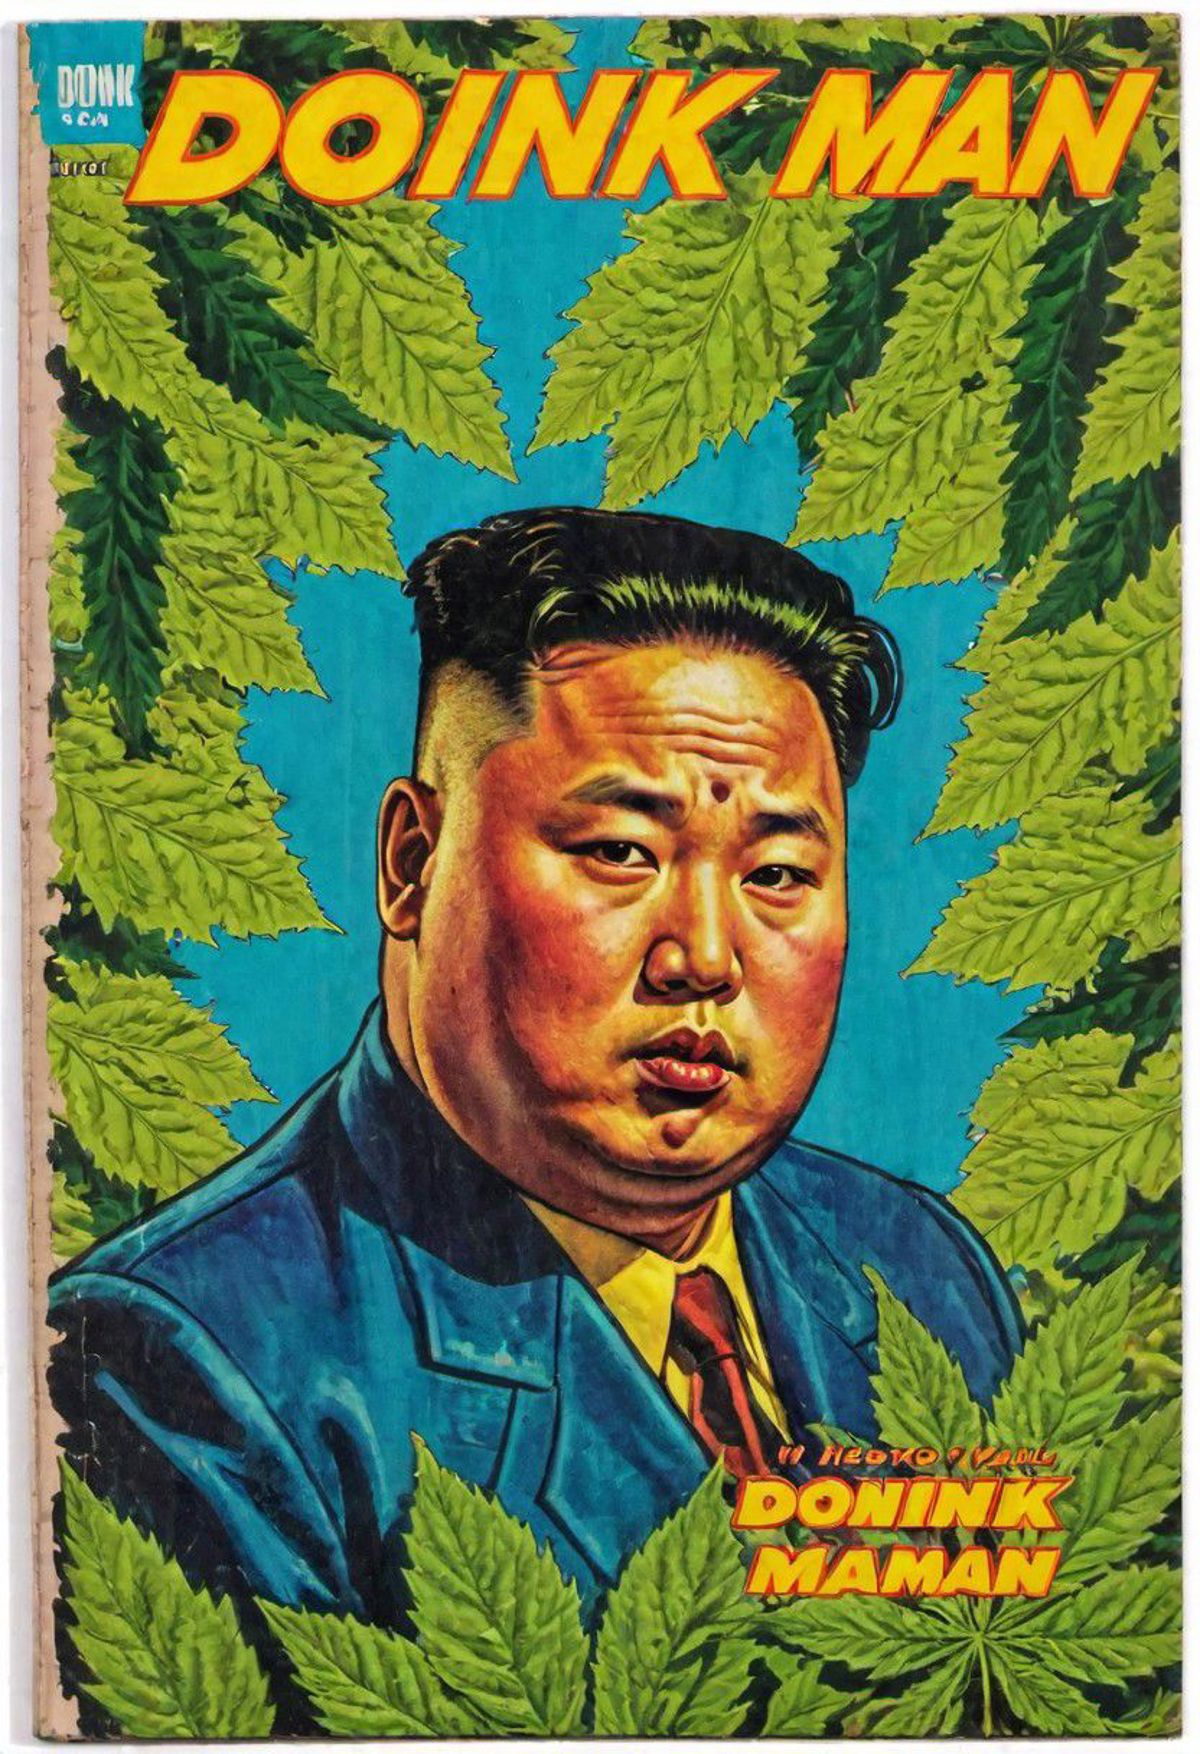 Vintage comic book cover of, (title says "DOINK MAN":1.35), Kim Jong Un, cannabis leaf pattern background, by r crumb, det...